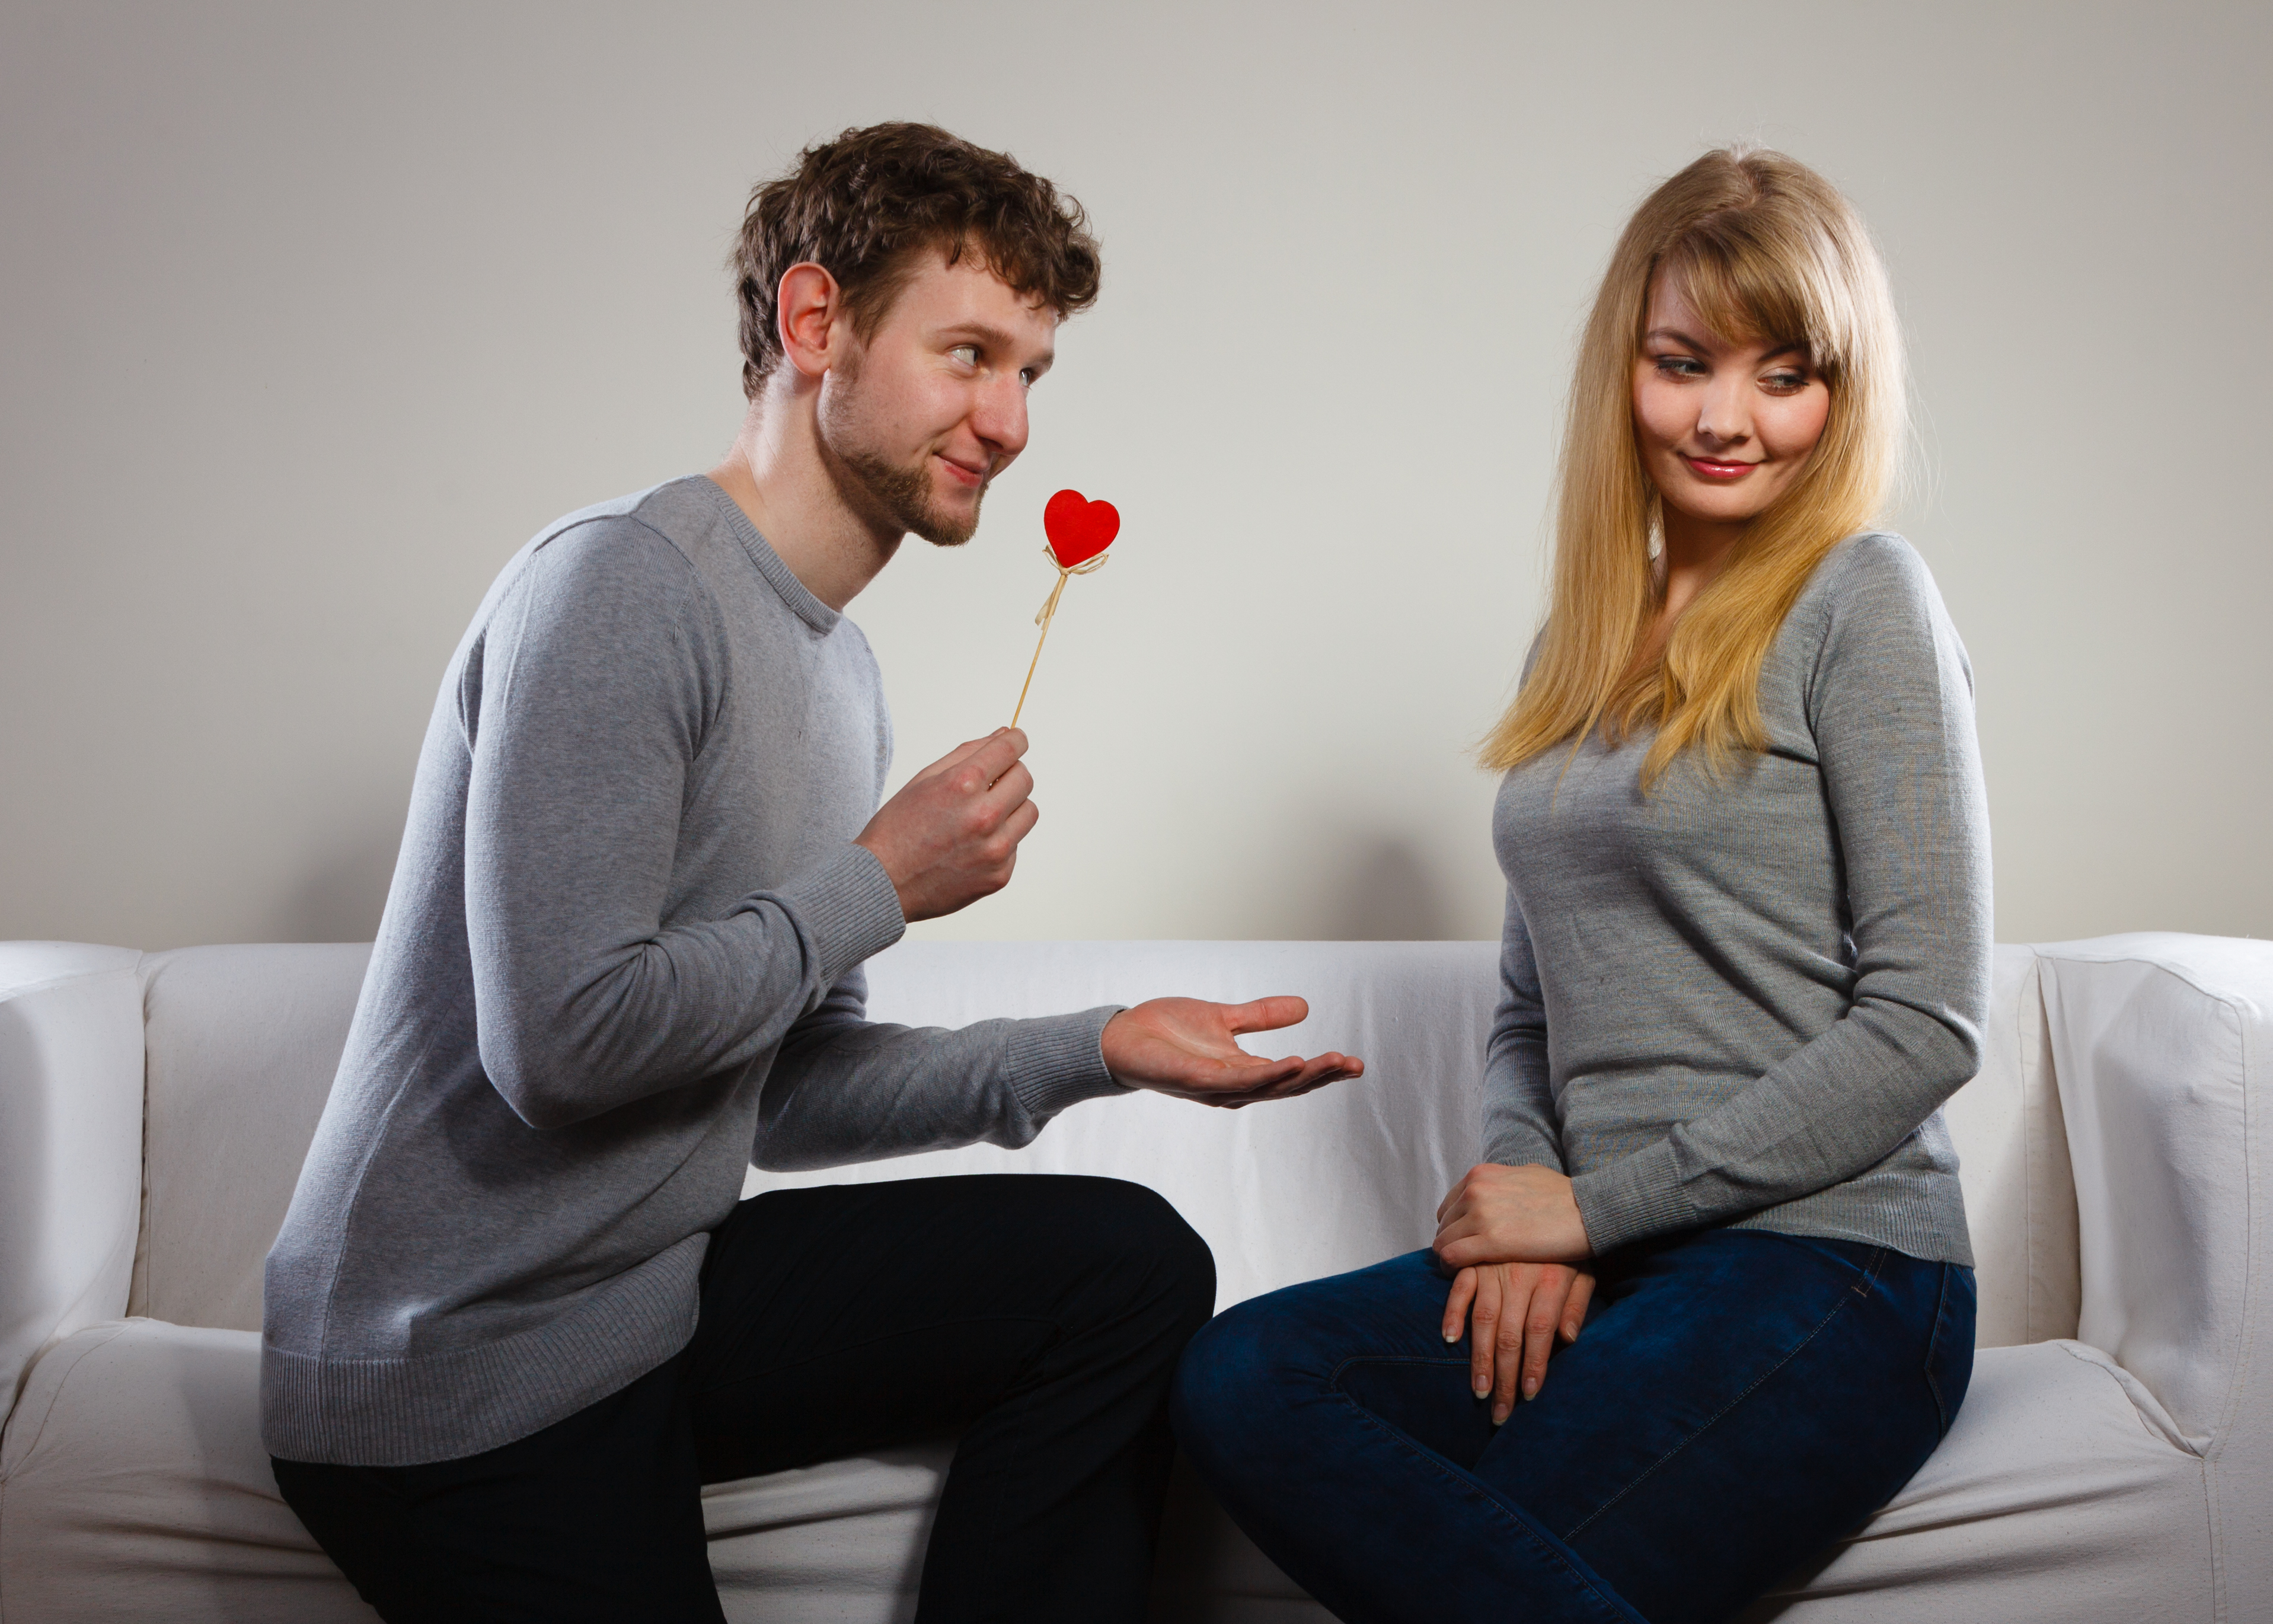 Should You Try To Date If You Are An Insecure Person?